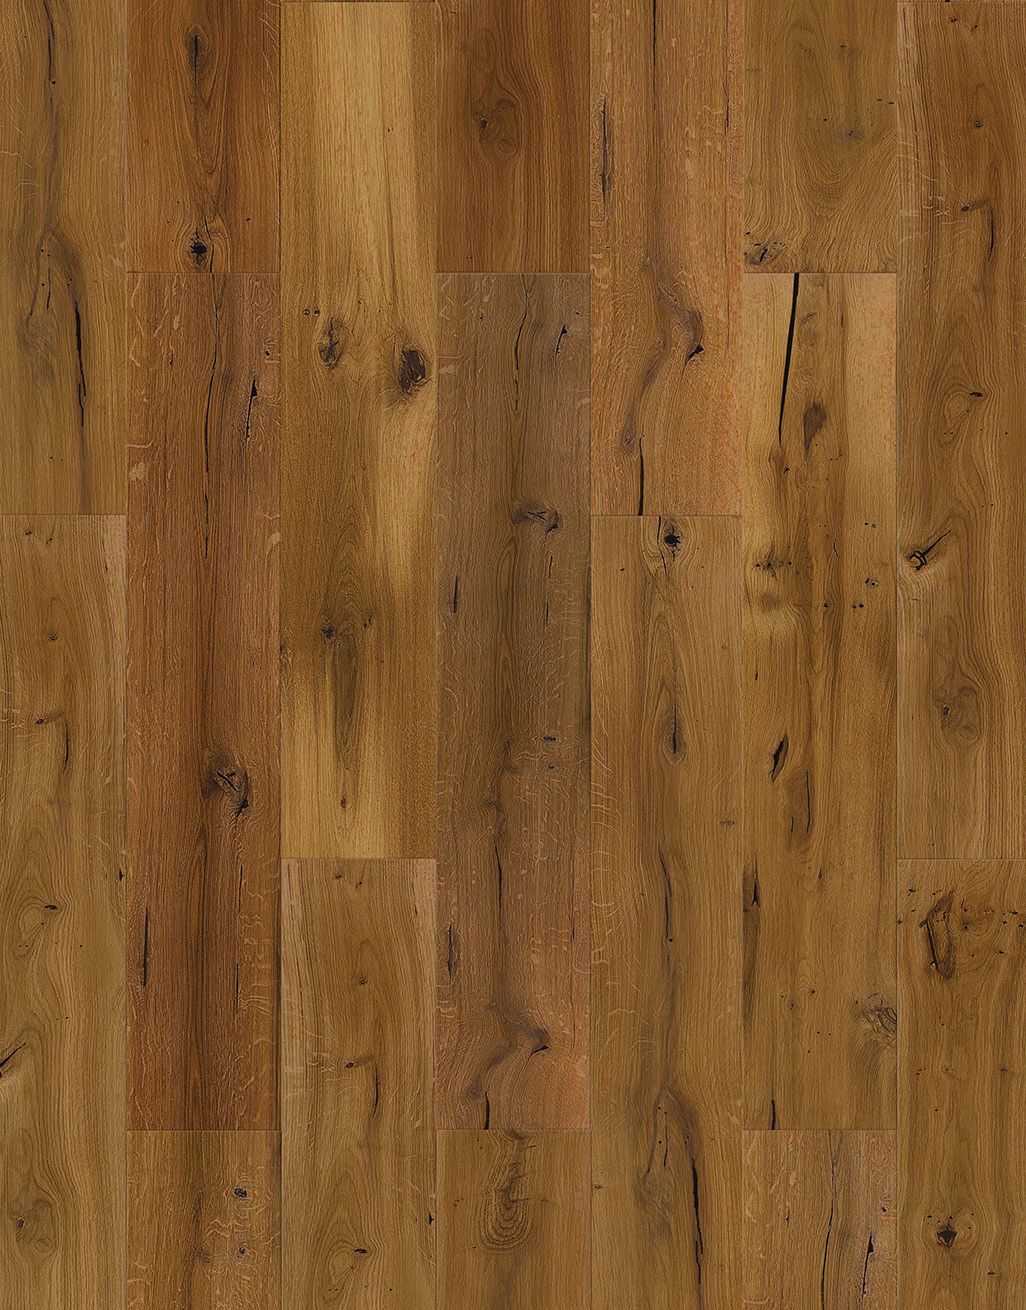 Carpenters Choice 130mm - Toffee Oak Lacquered Engineered Wood Flooring 4